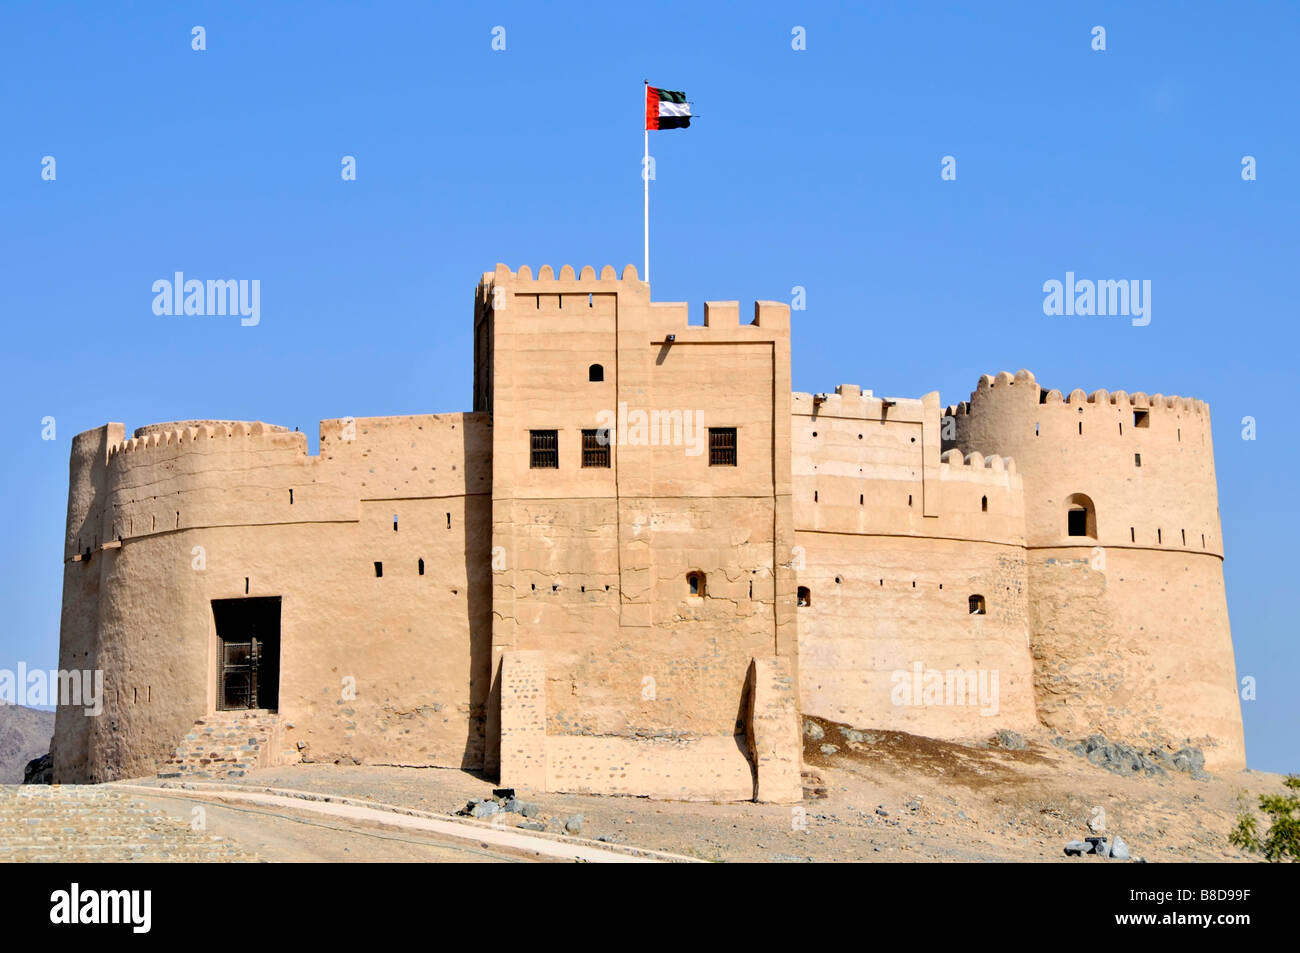 Old historical 16th century Fujairah Fort or castle a sightseeing tourist attraction restored & maintained by Department of Antiquities & Heritage UAE Stock Photo